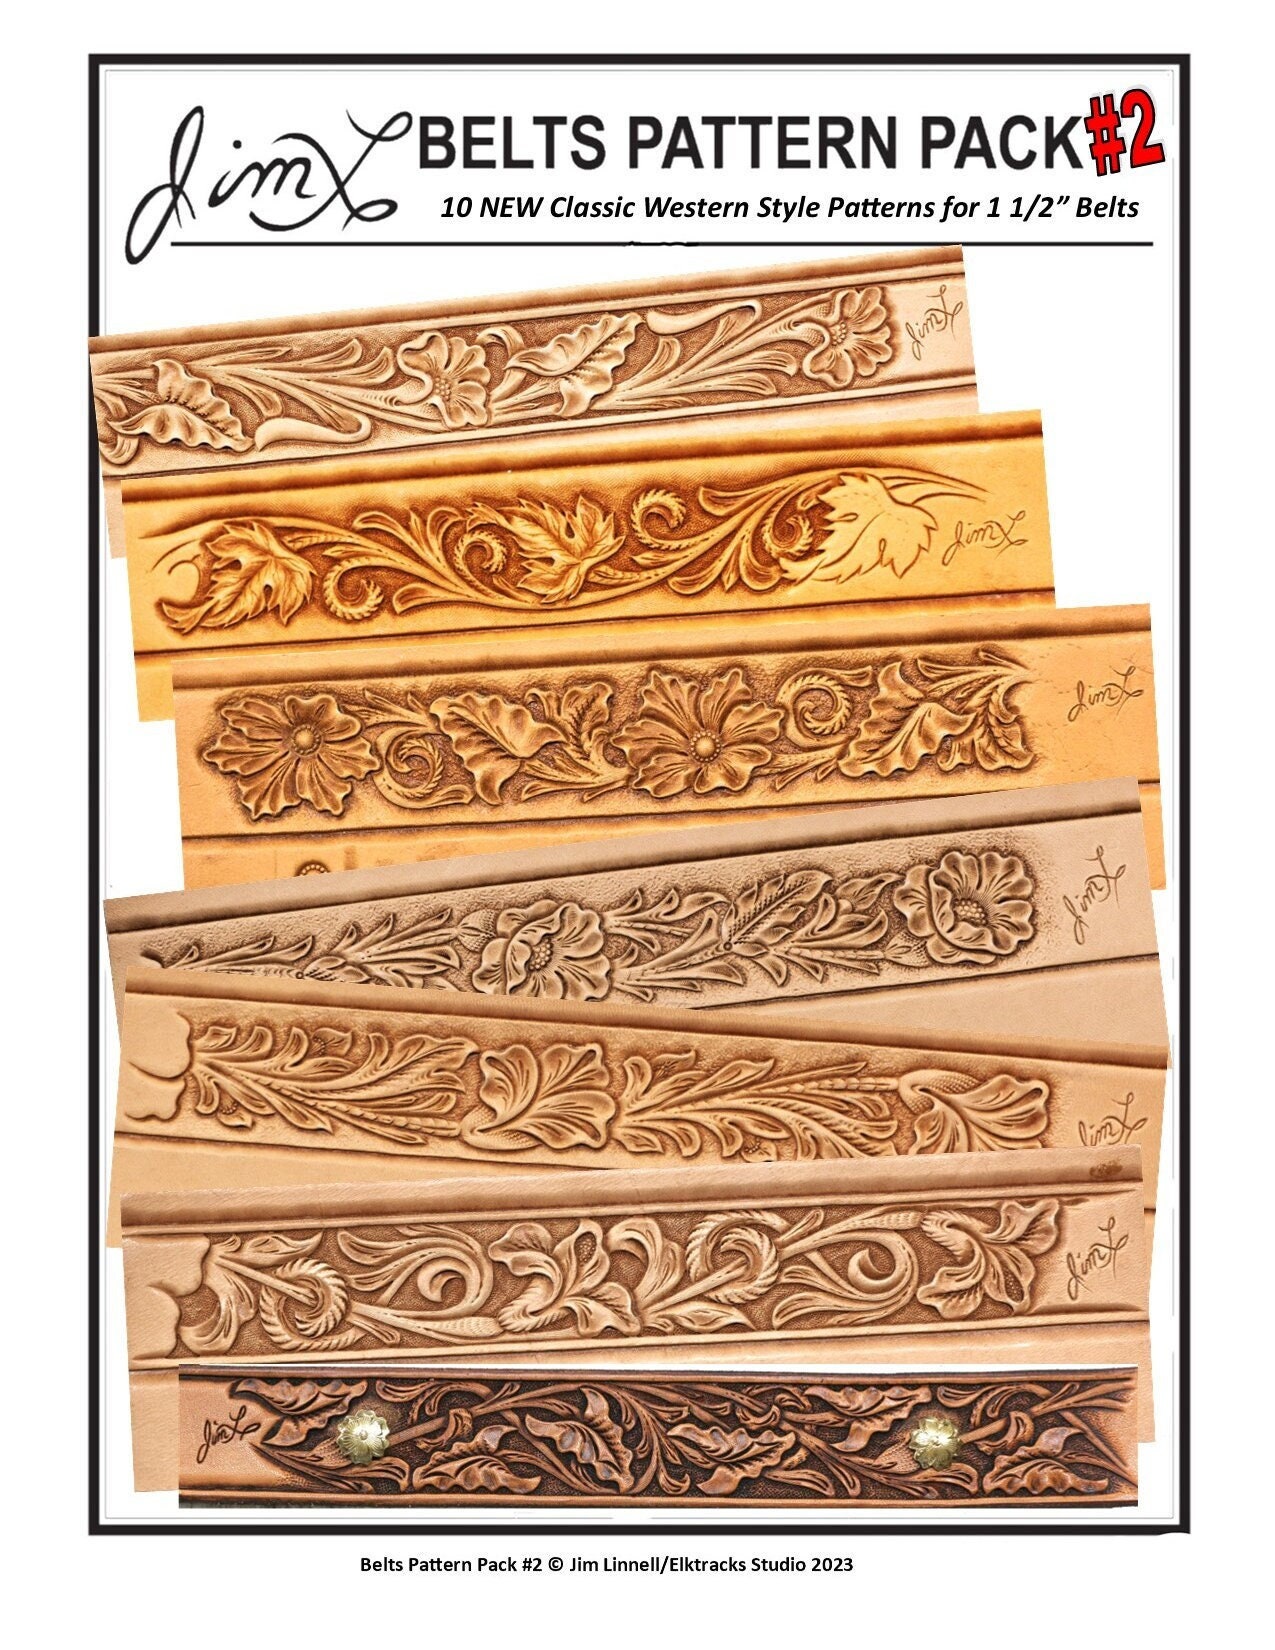 Sheridan Style Corner Tap-off Tracings 88 Tracing Patterns by Jim Linnell  leather Patterns DIGITAL DOWNLOAD 